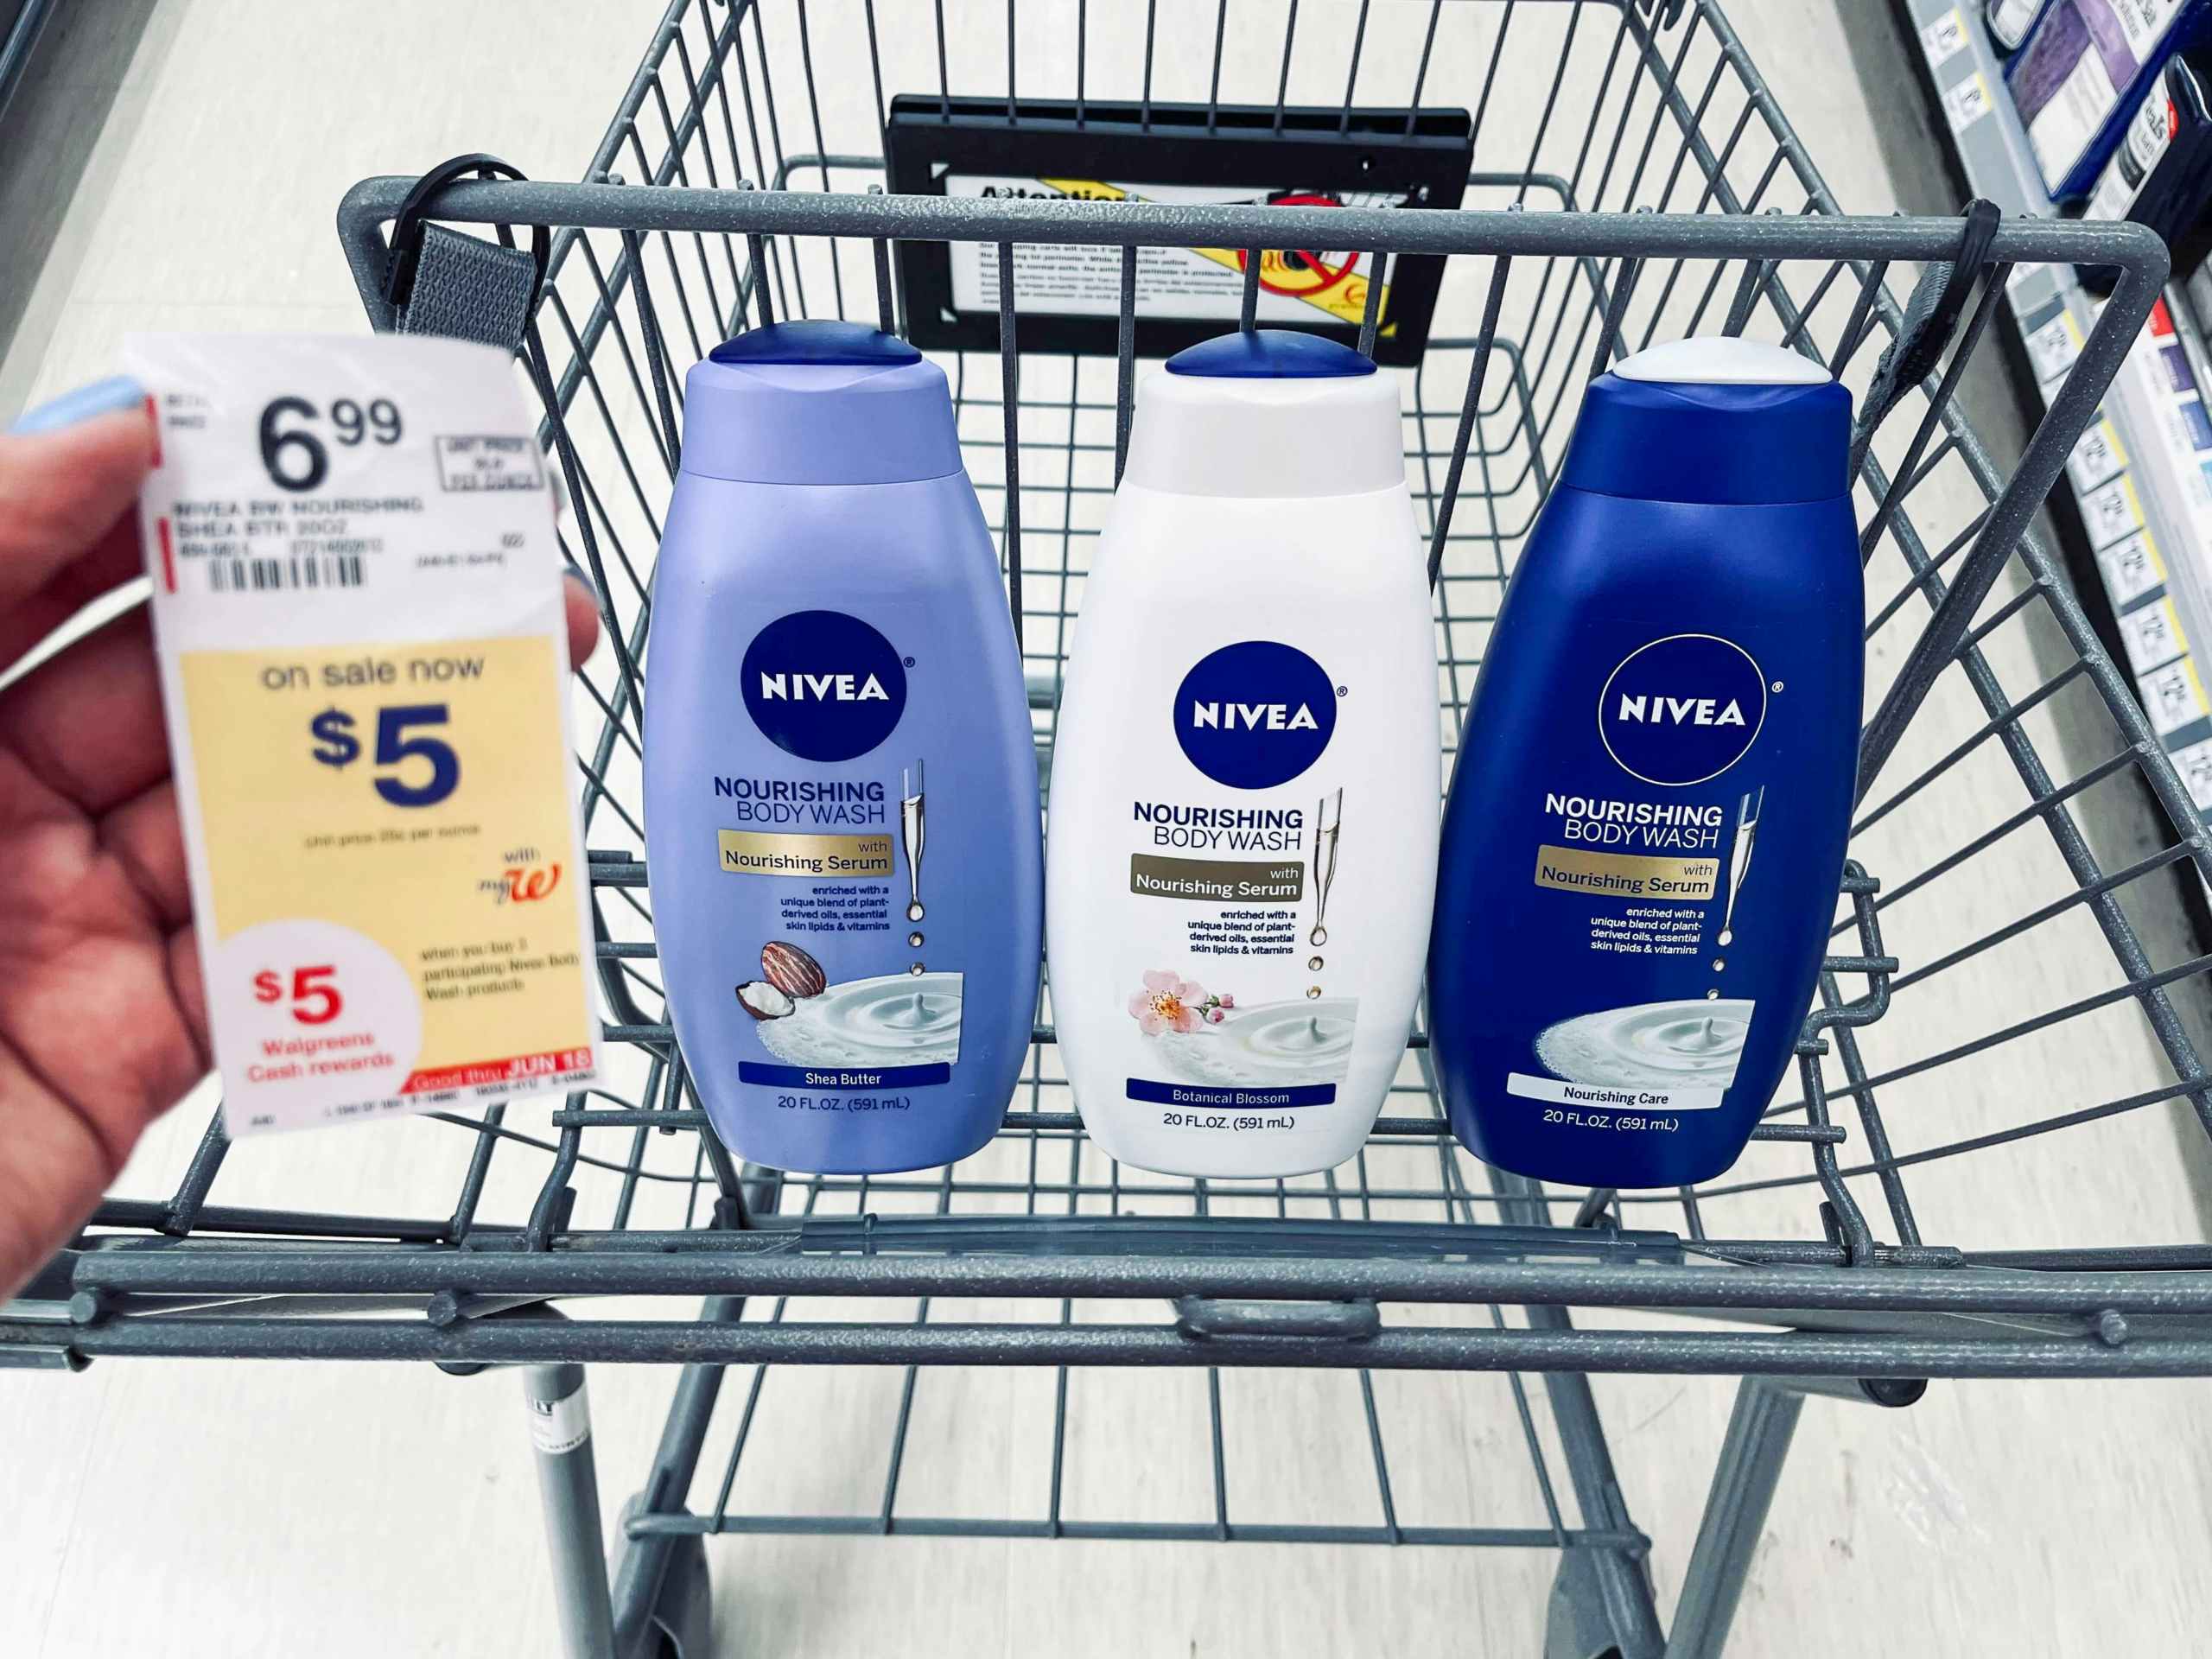 shopping cart with three bottles of Nivea body washes and hand holding sales tag in the air next to the bottles